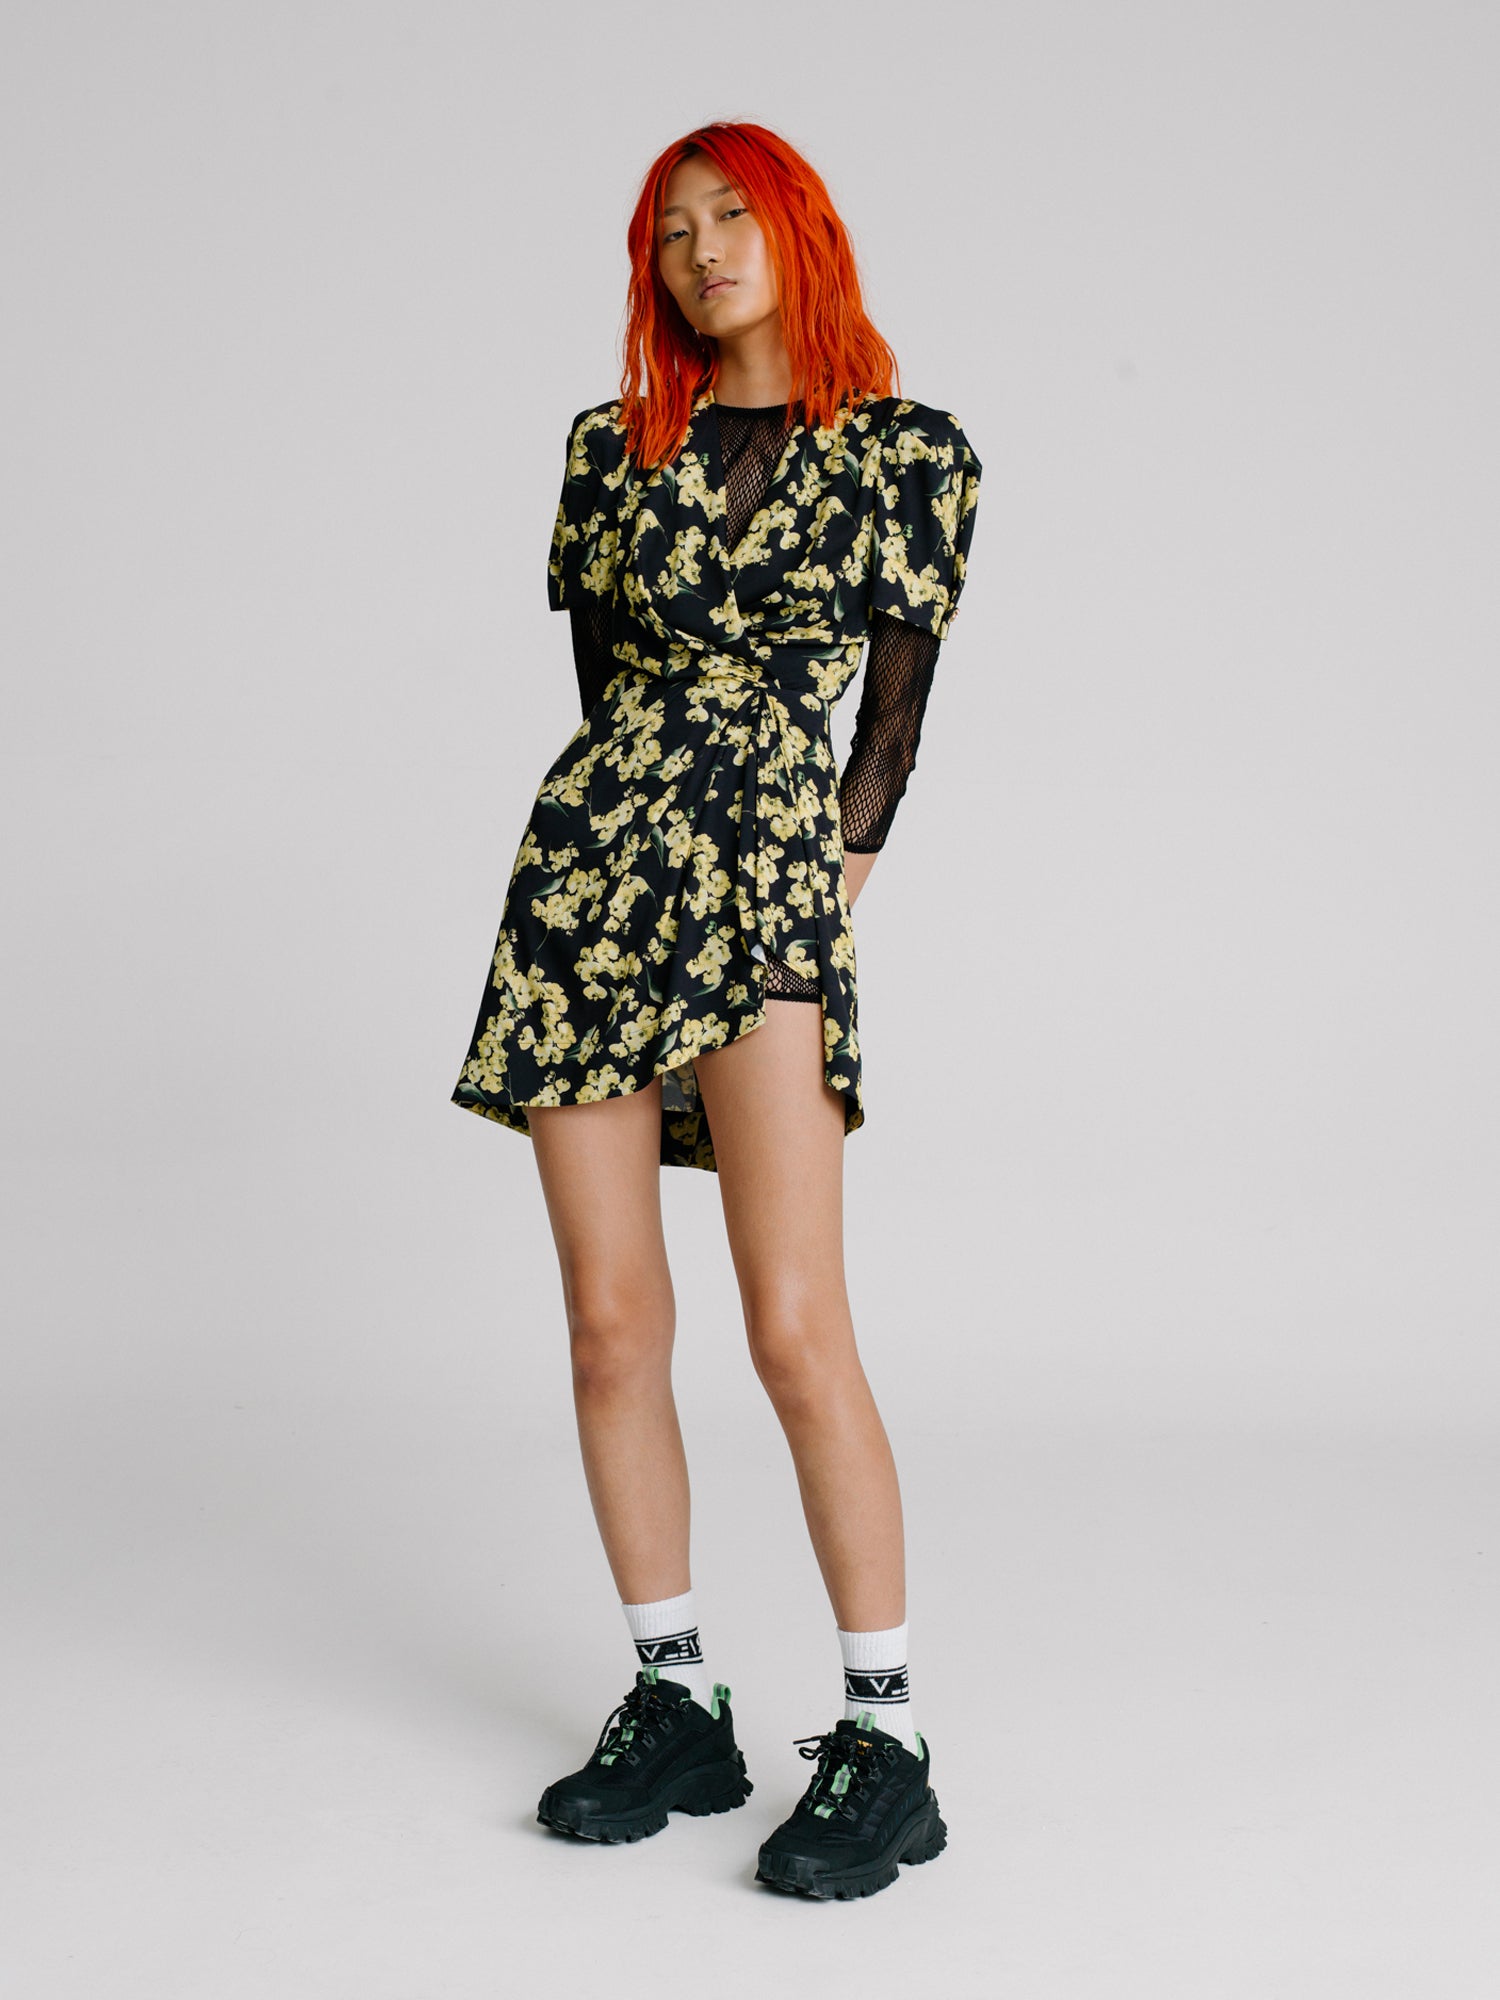 Red hair girl wearing a black floral dress